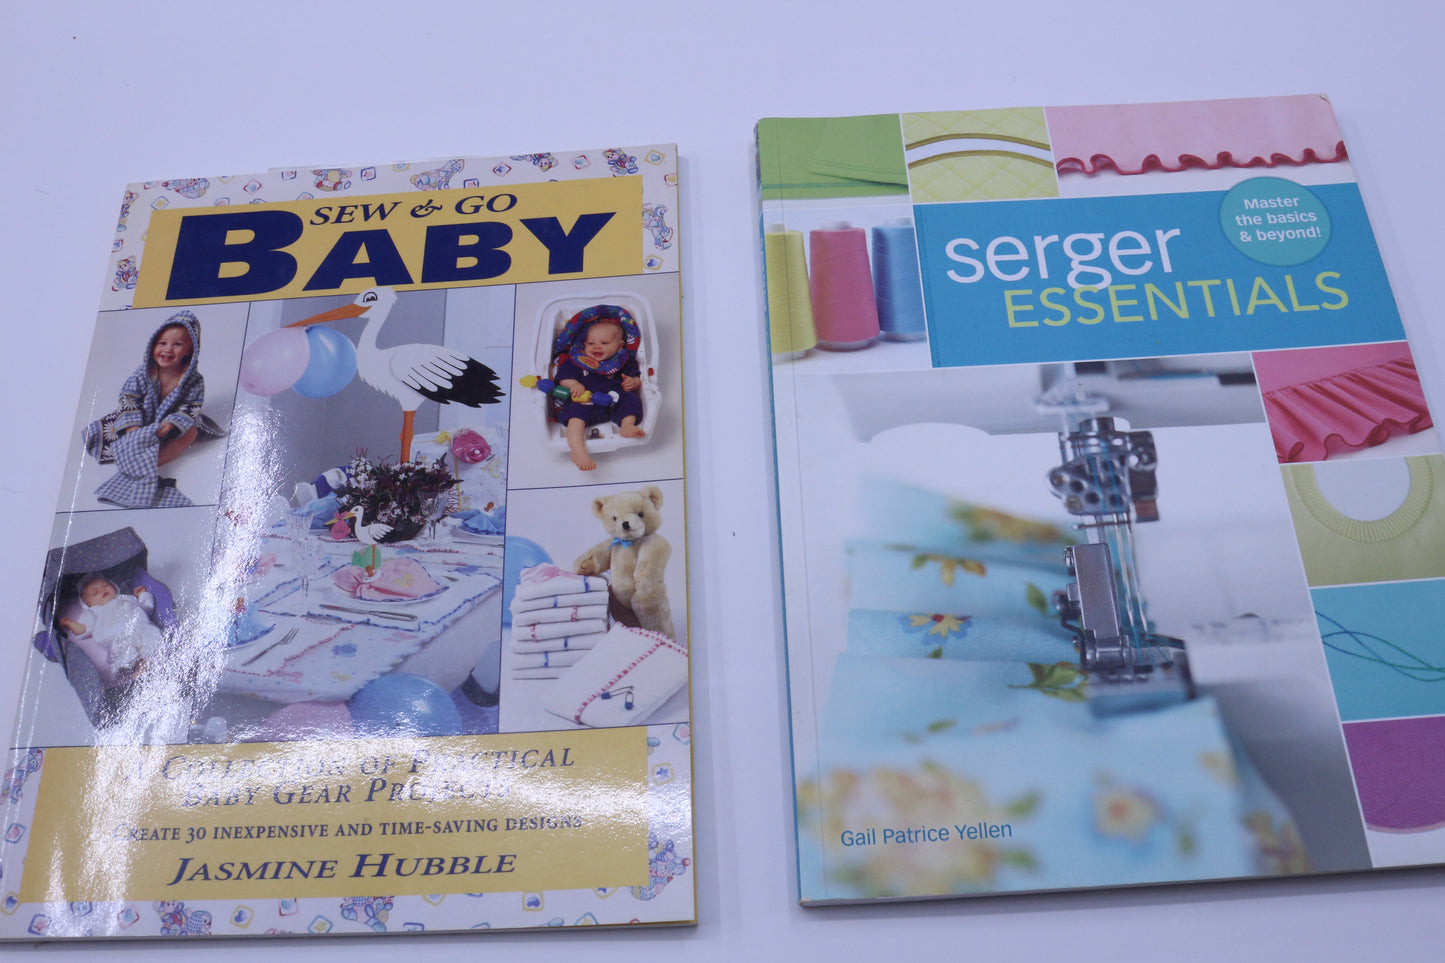 Sew and Go Baby or Serger Essentials